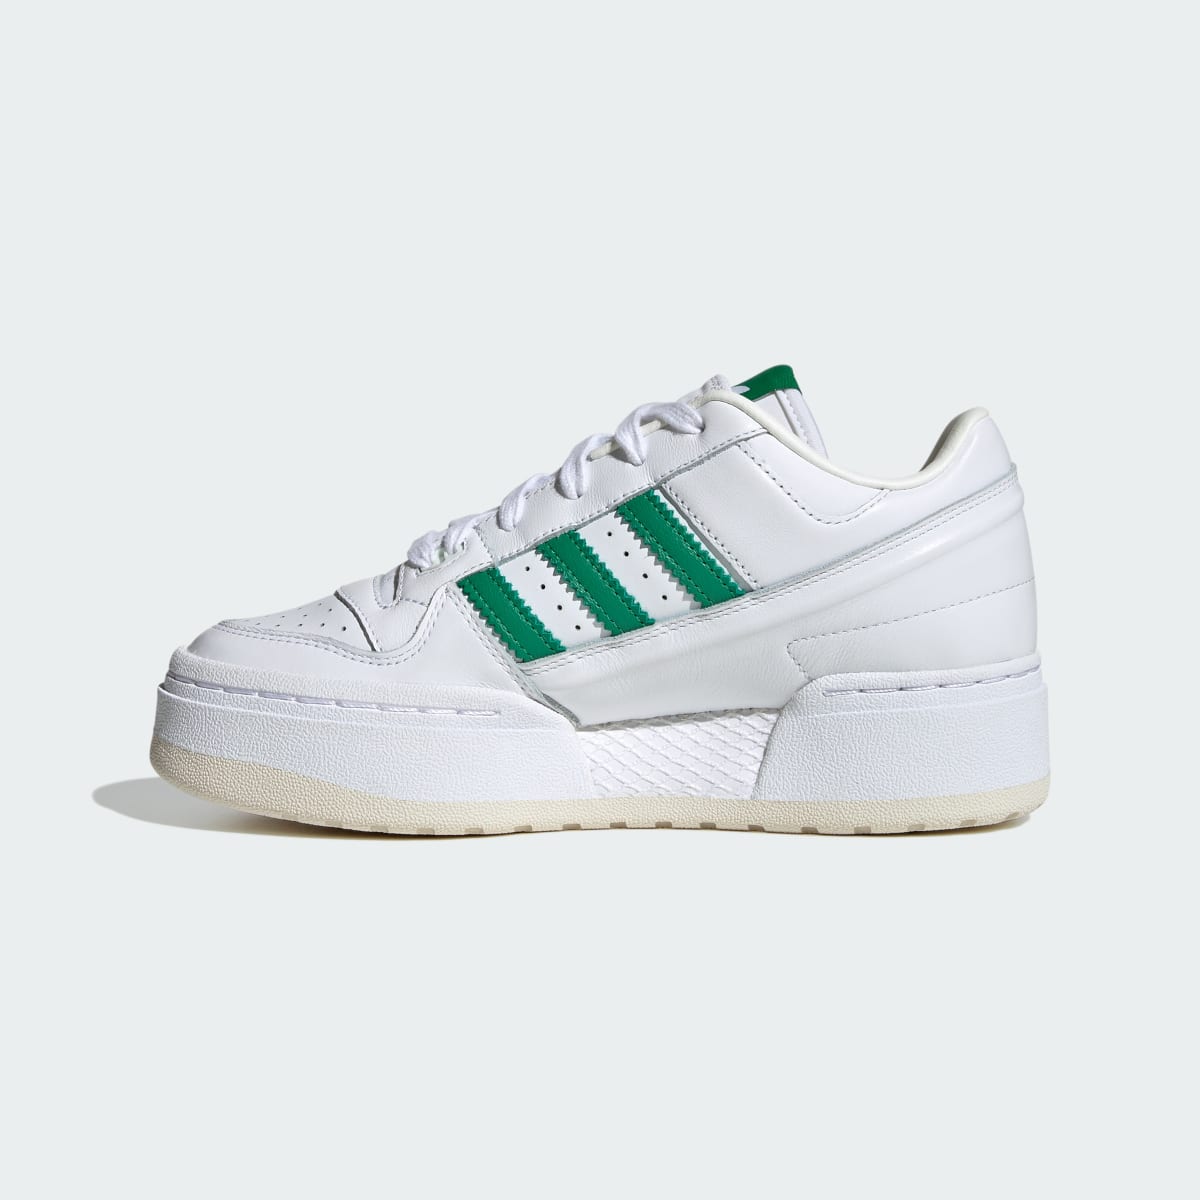 Adidas Chaussure Forum XLG. 7